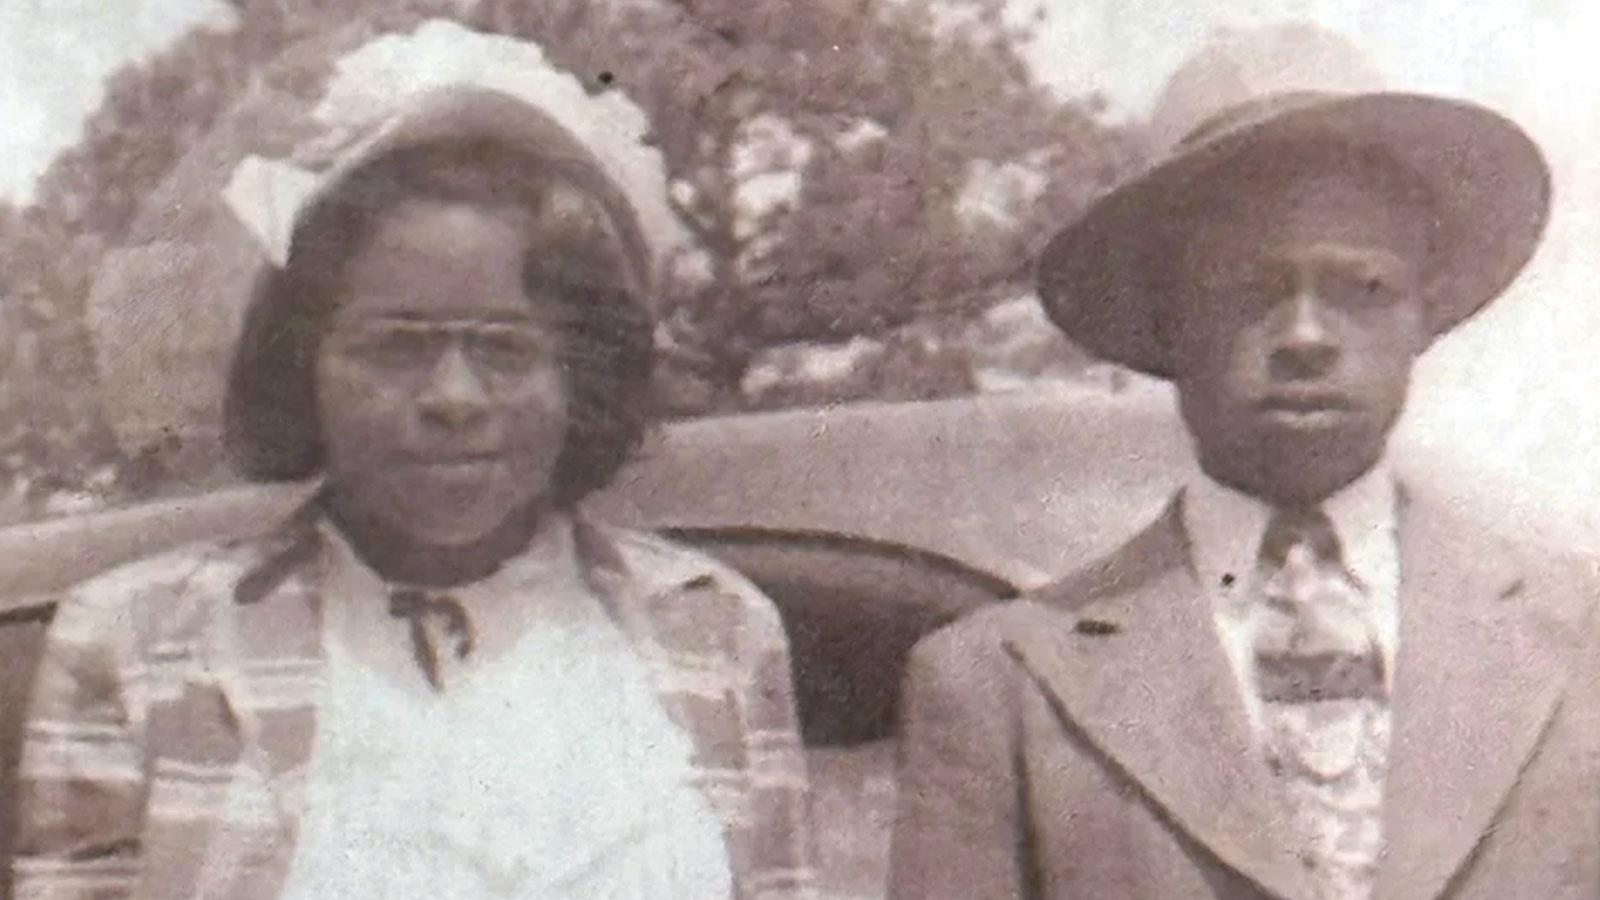 Image of Eula and Roland Smith, Evelyn Booker's parents. (Courtesy Evelyn Booker)